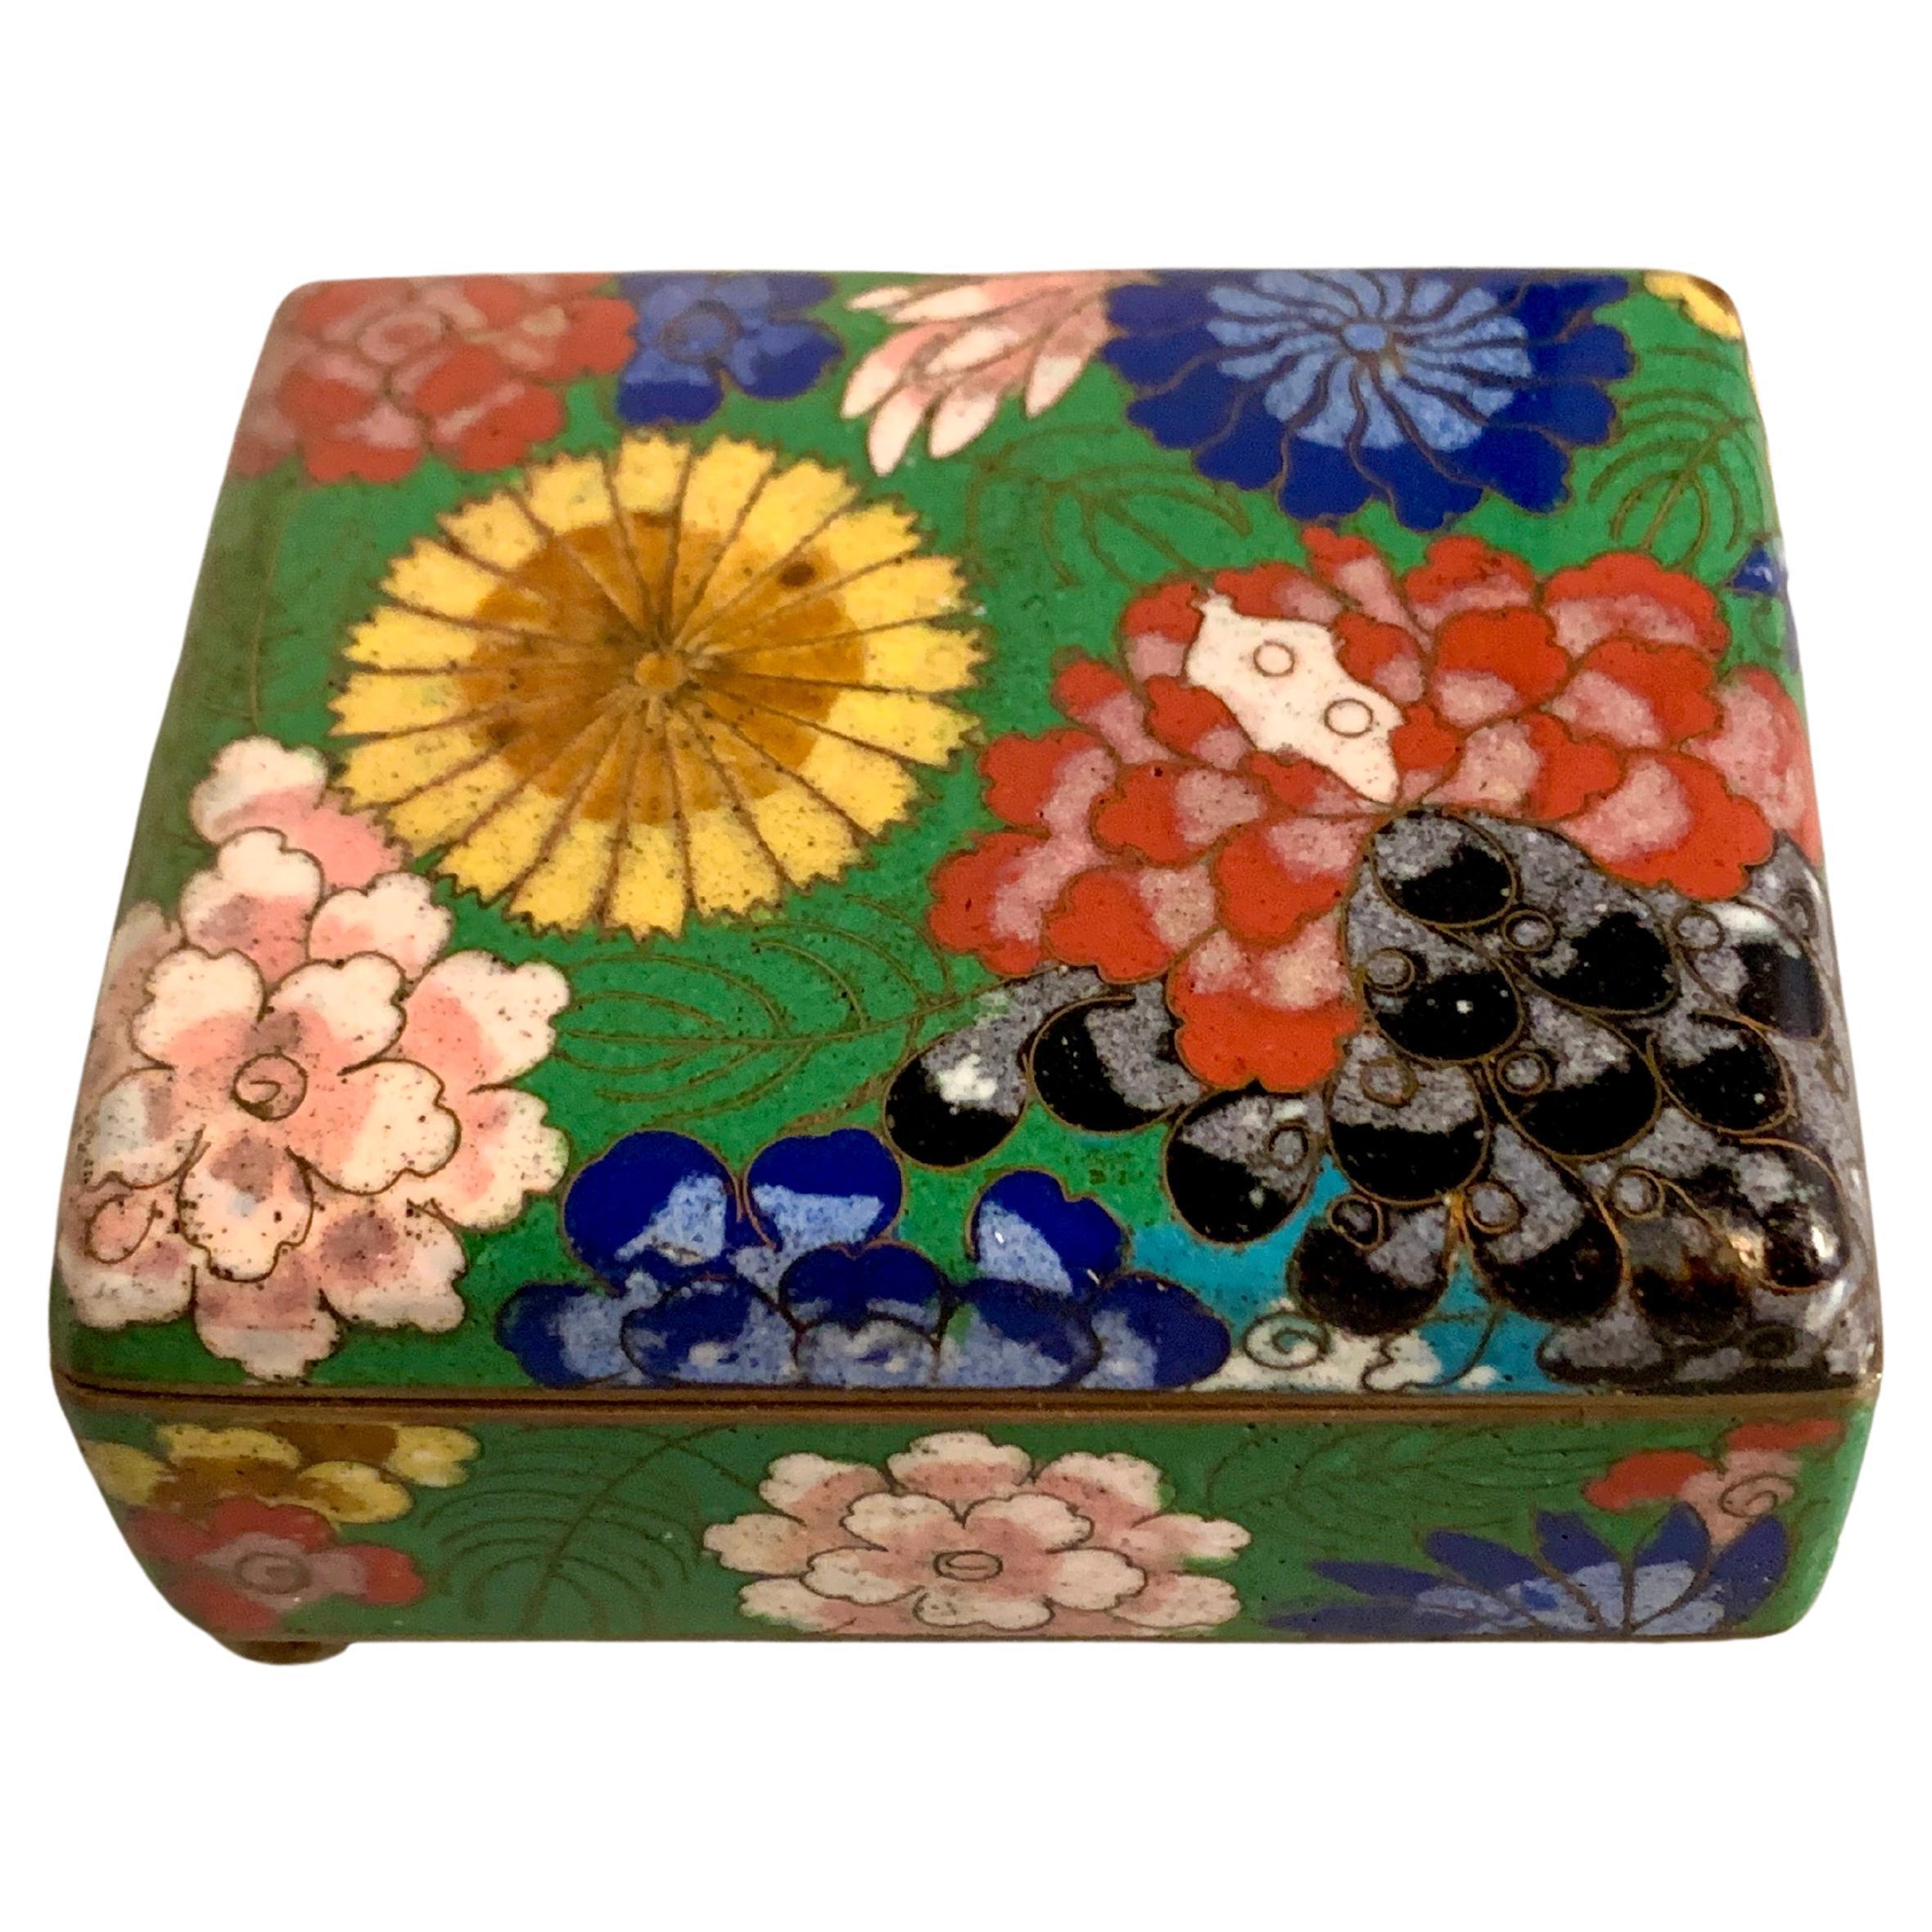 Small Chinese Floral Cloisonne Trinket Box, Republic Period, circa 1930s, China